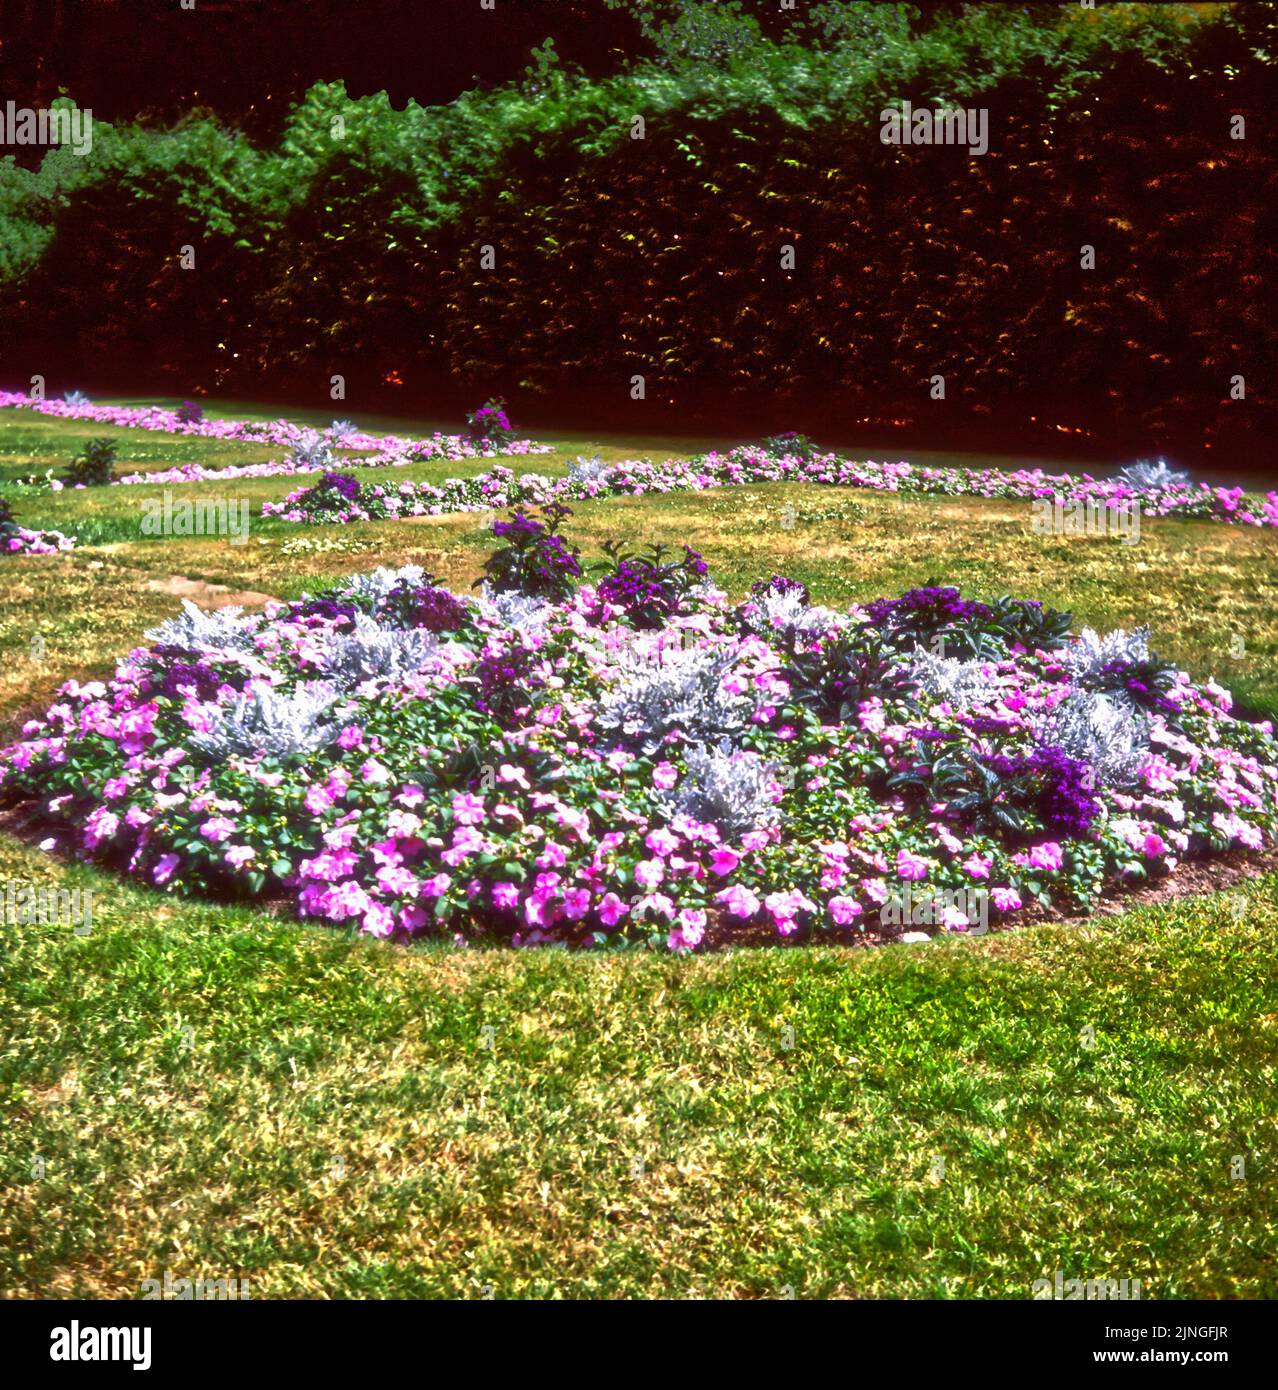 A floral display of colourful summer flowering bedding plants in a silver and pink flower bed Stock Photo